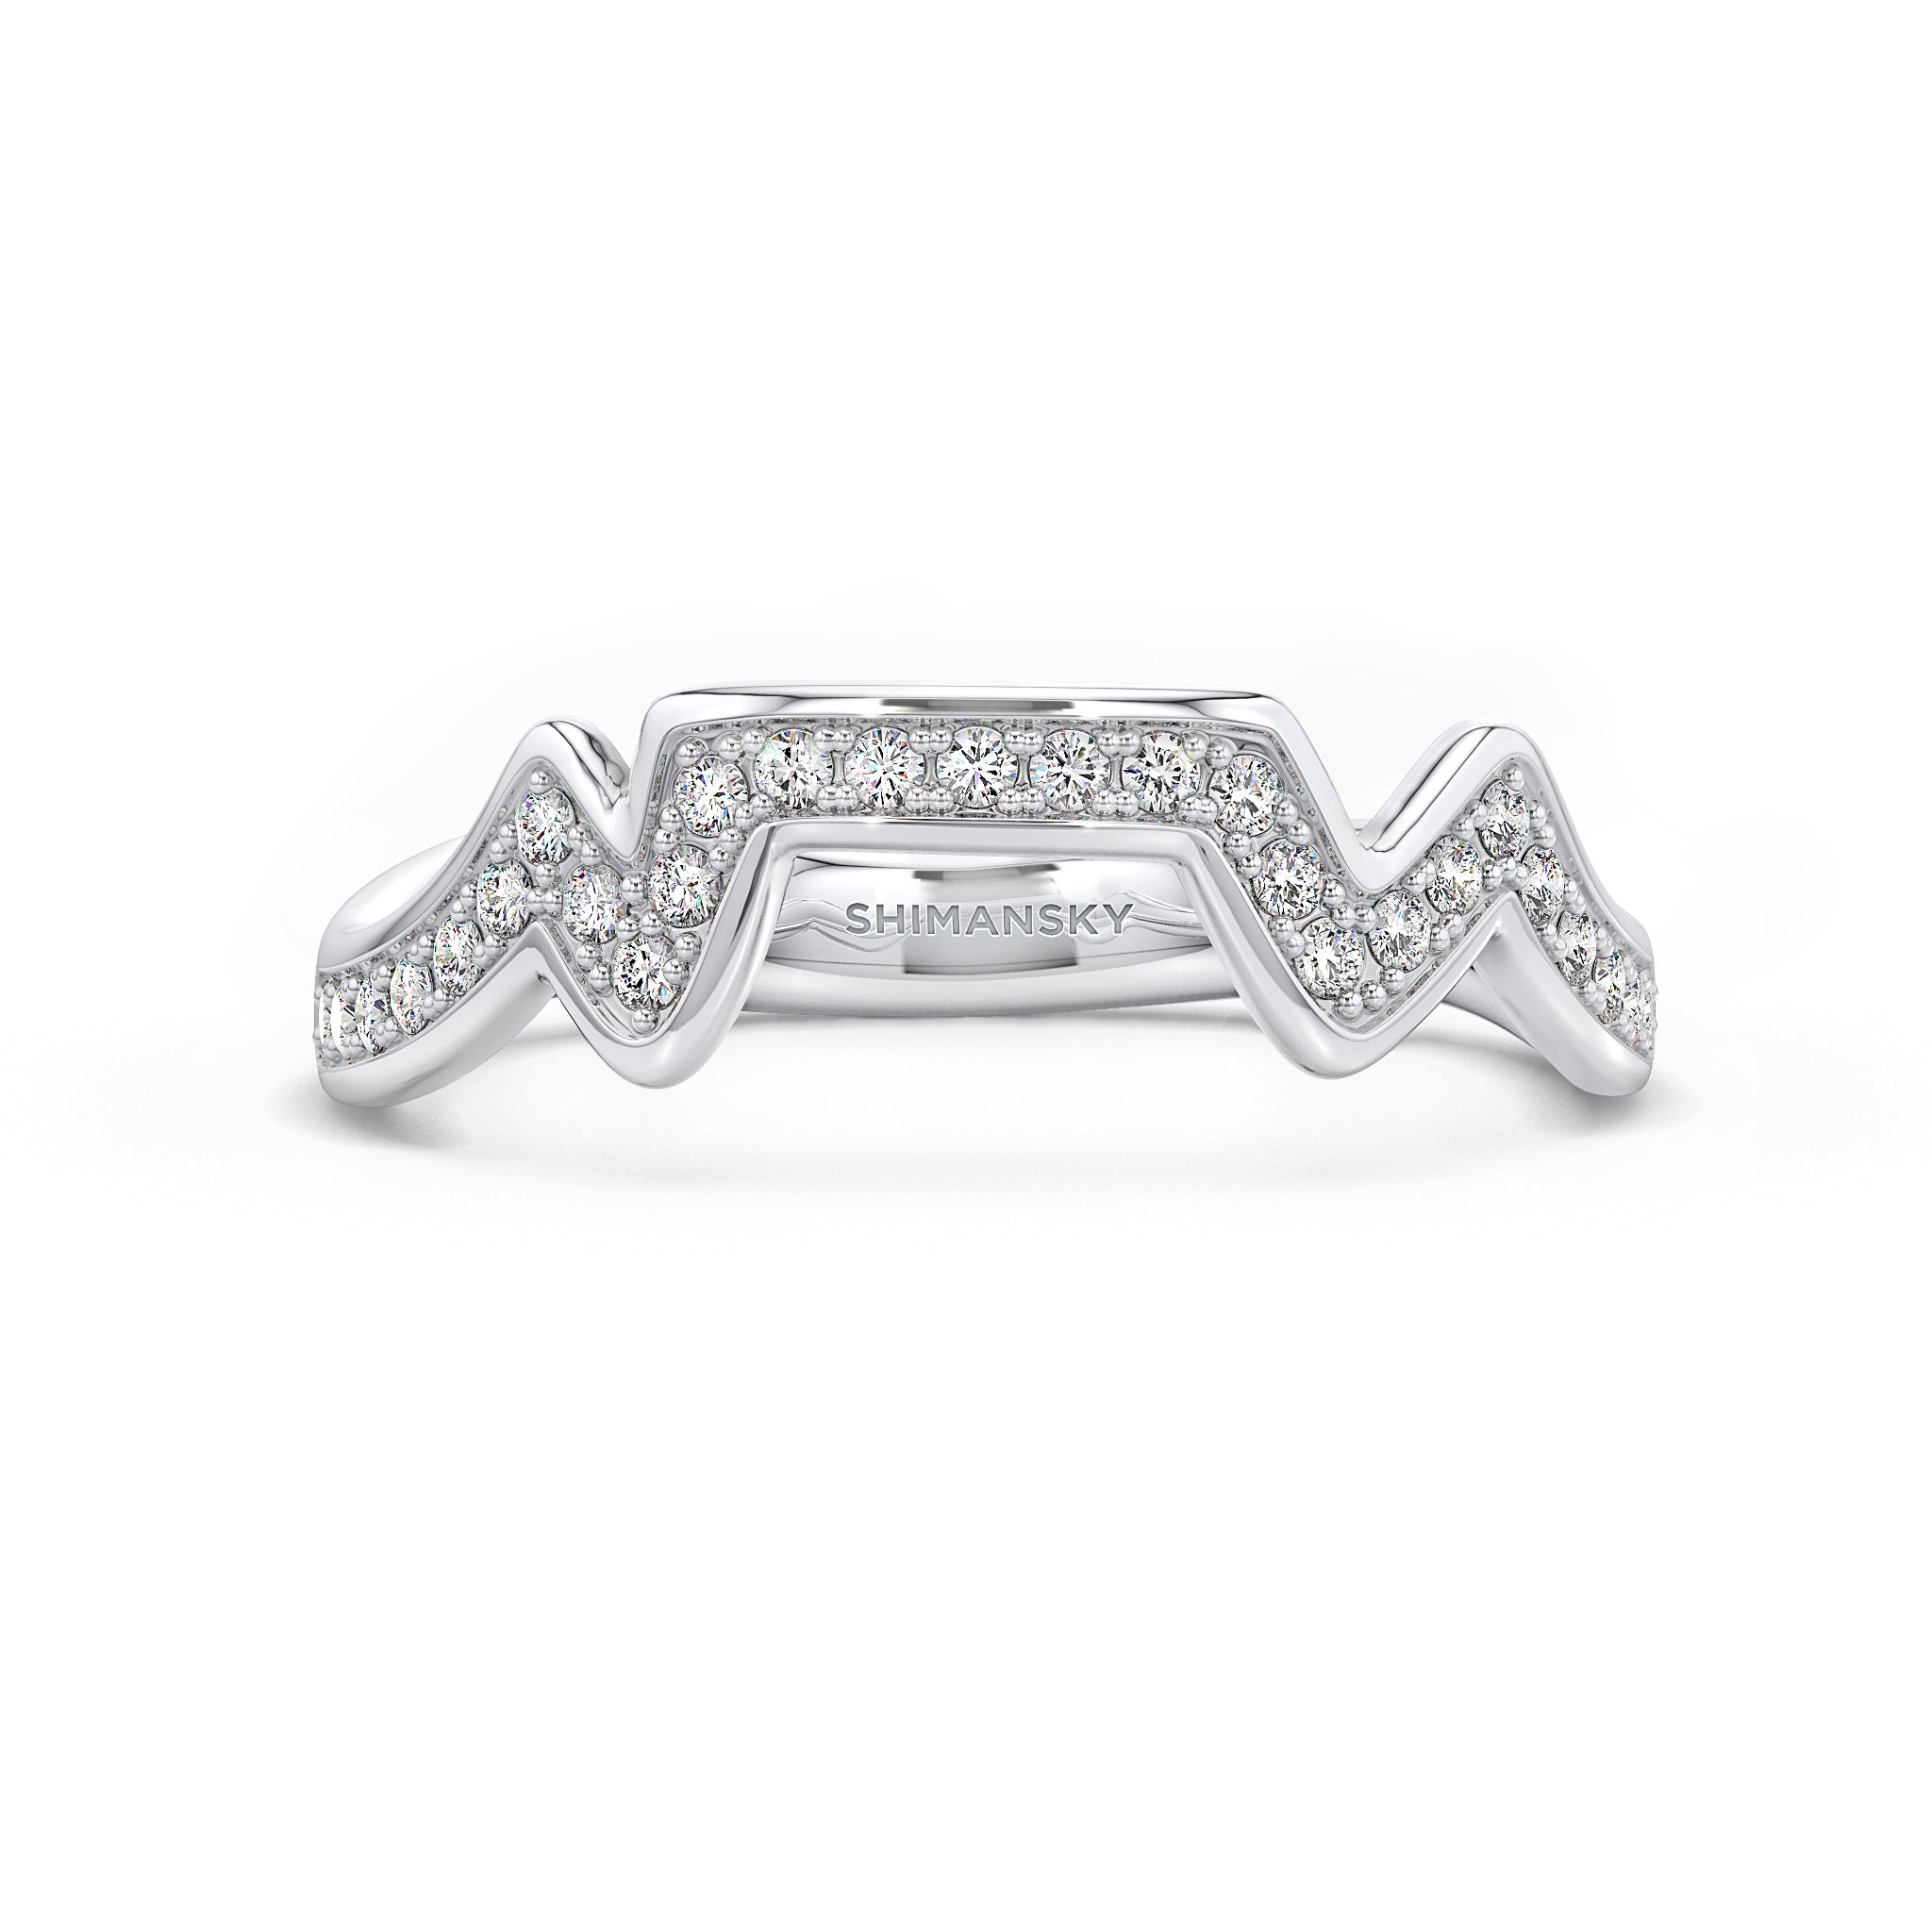 Shimansky - Table Mountain Pave Diamond Ring Crafted in 14K White Gold